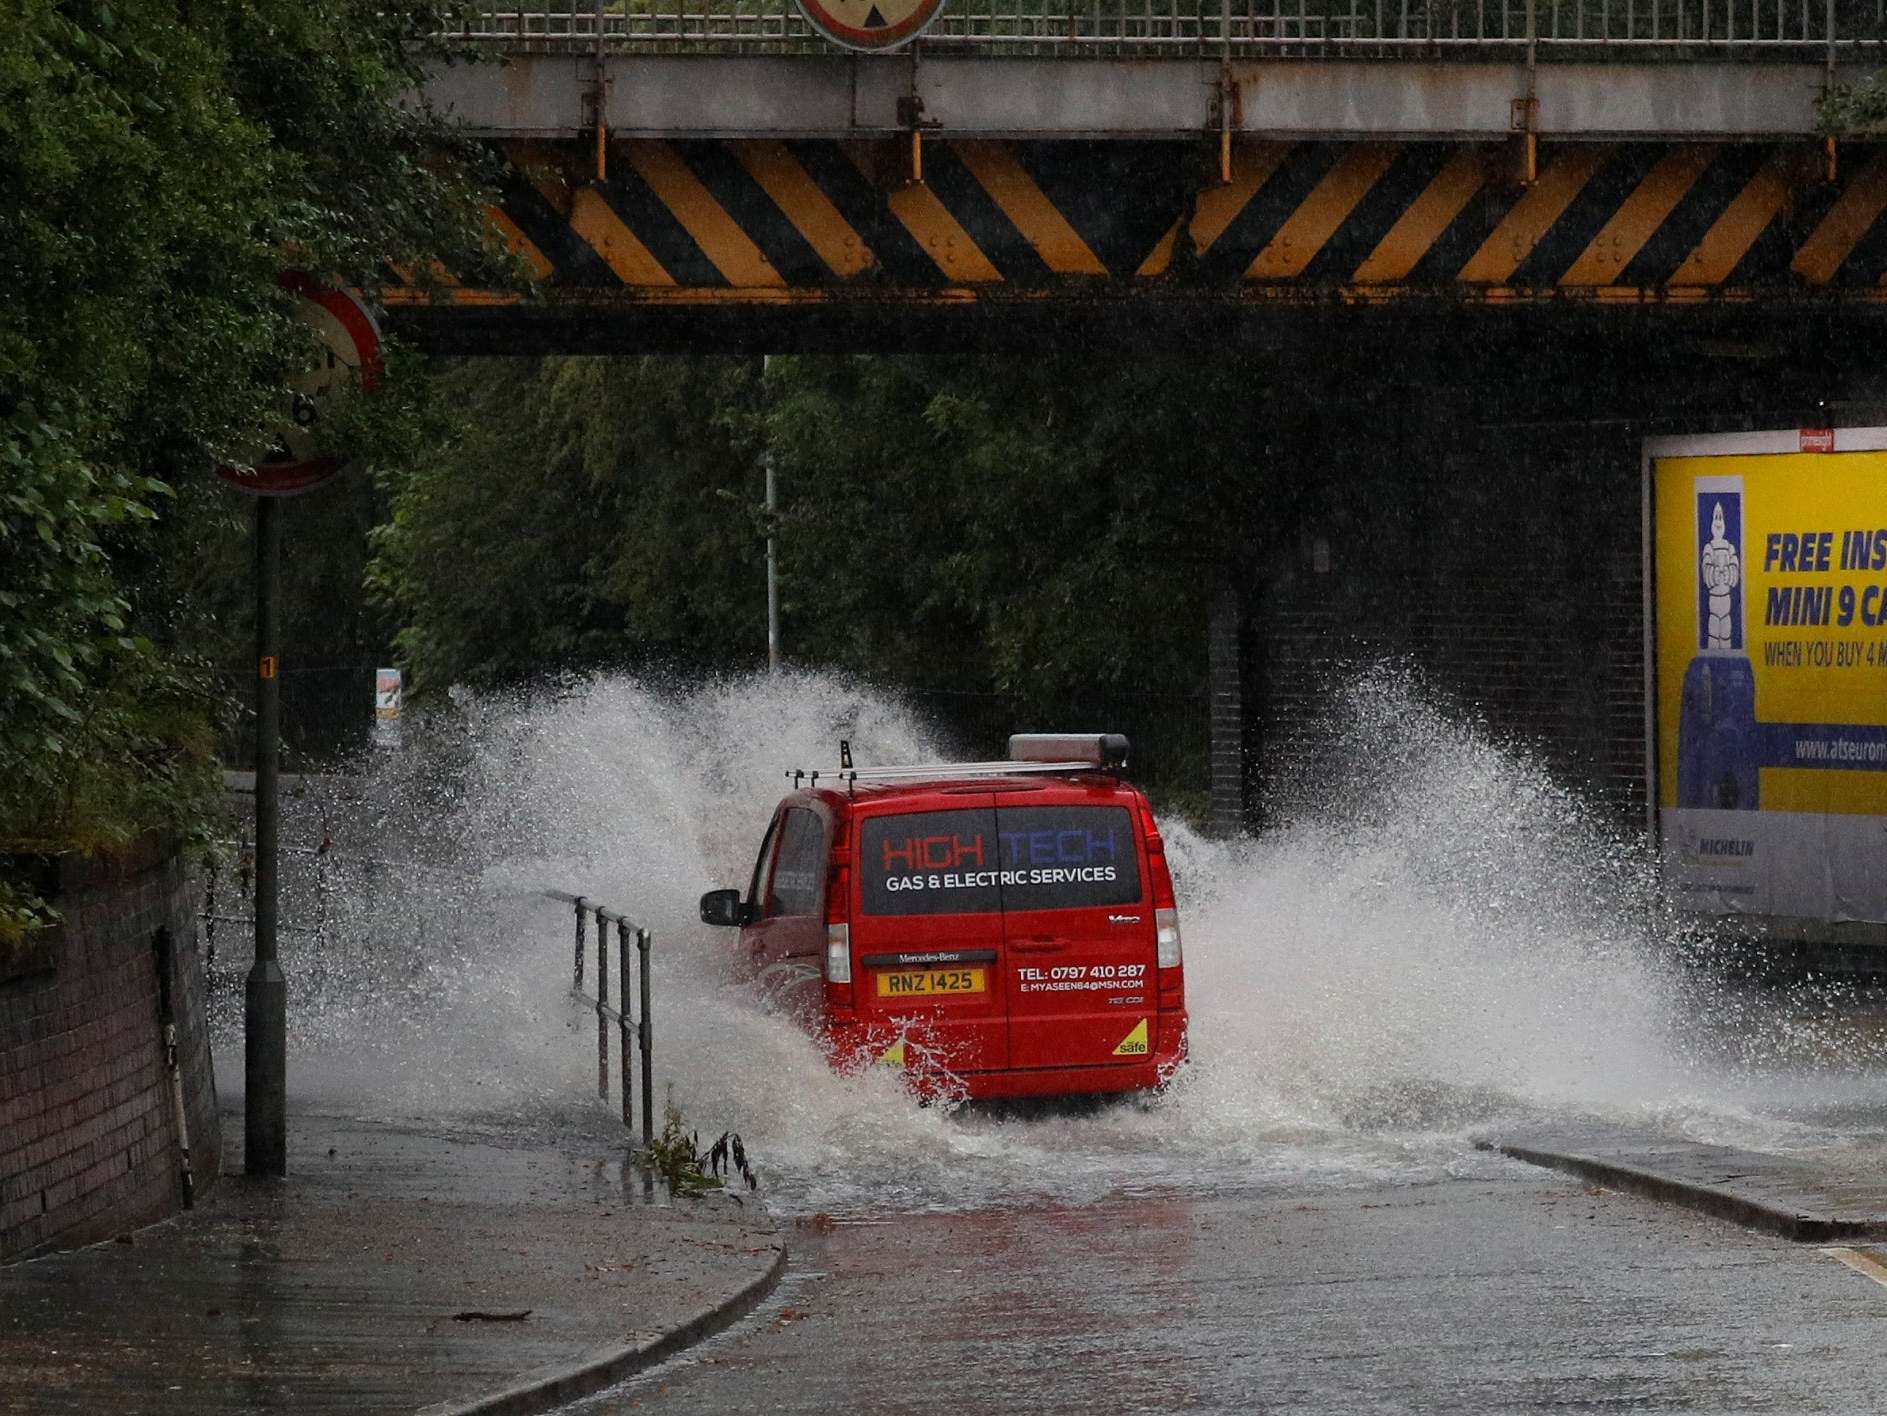 Britain to experience worst flooding in Europe, major climate change study warns